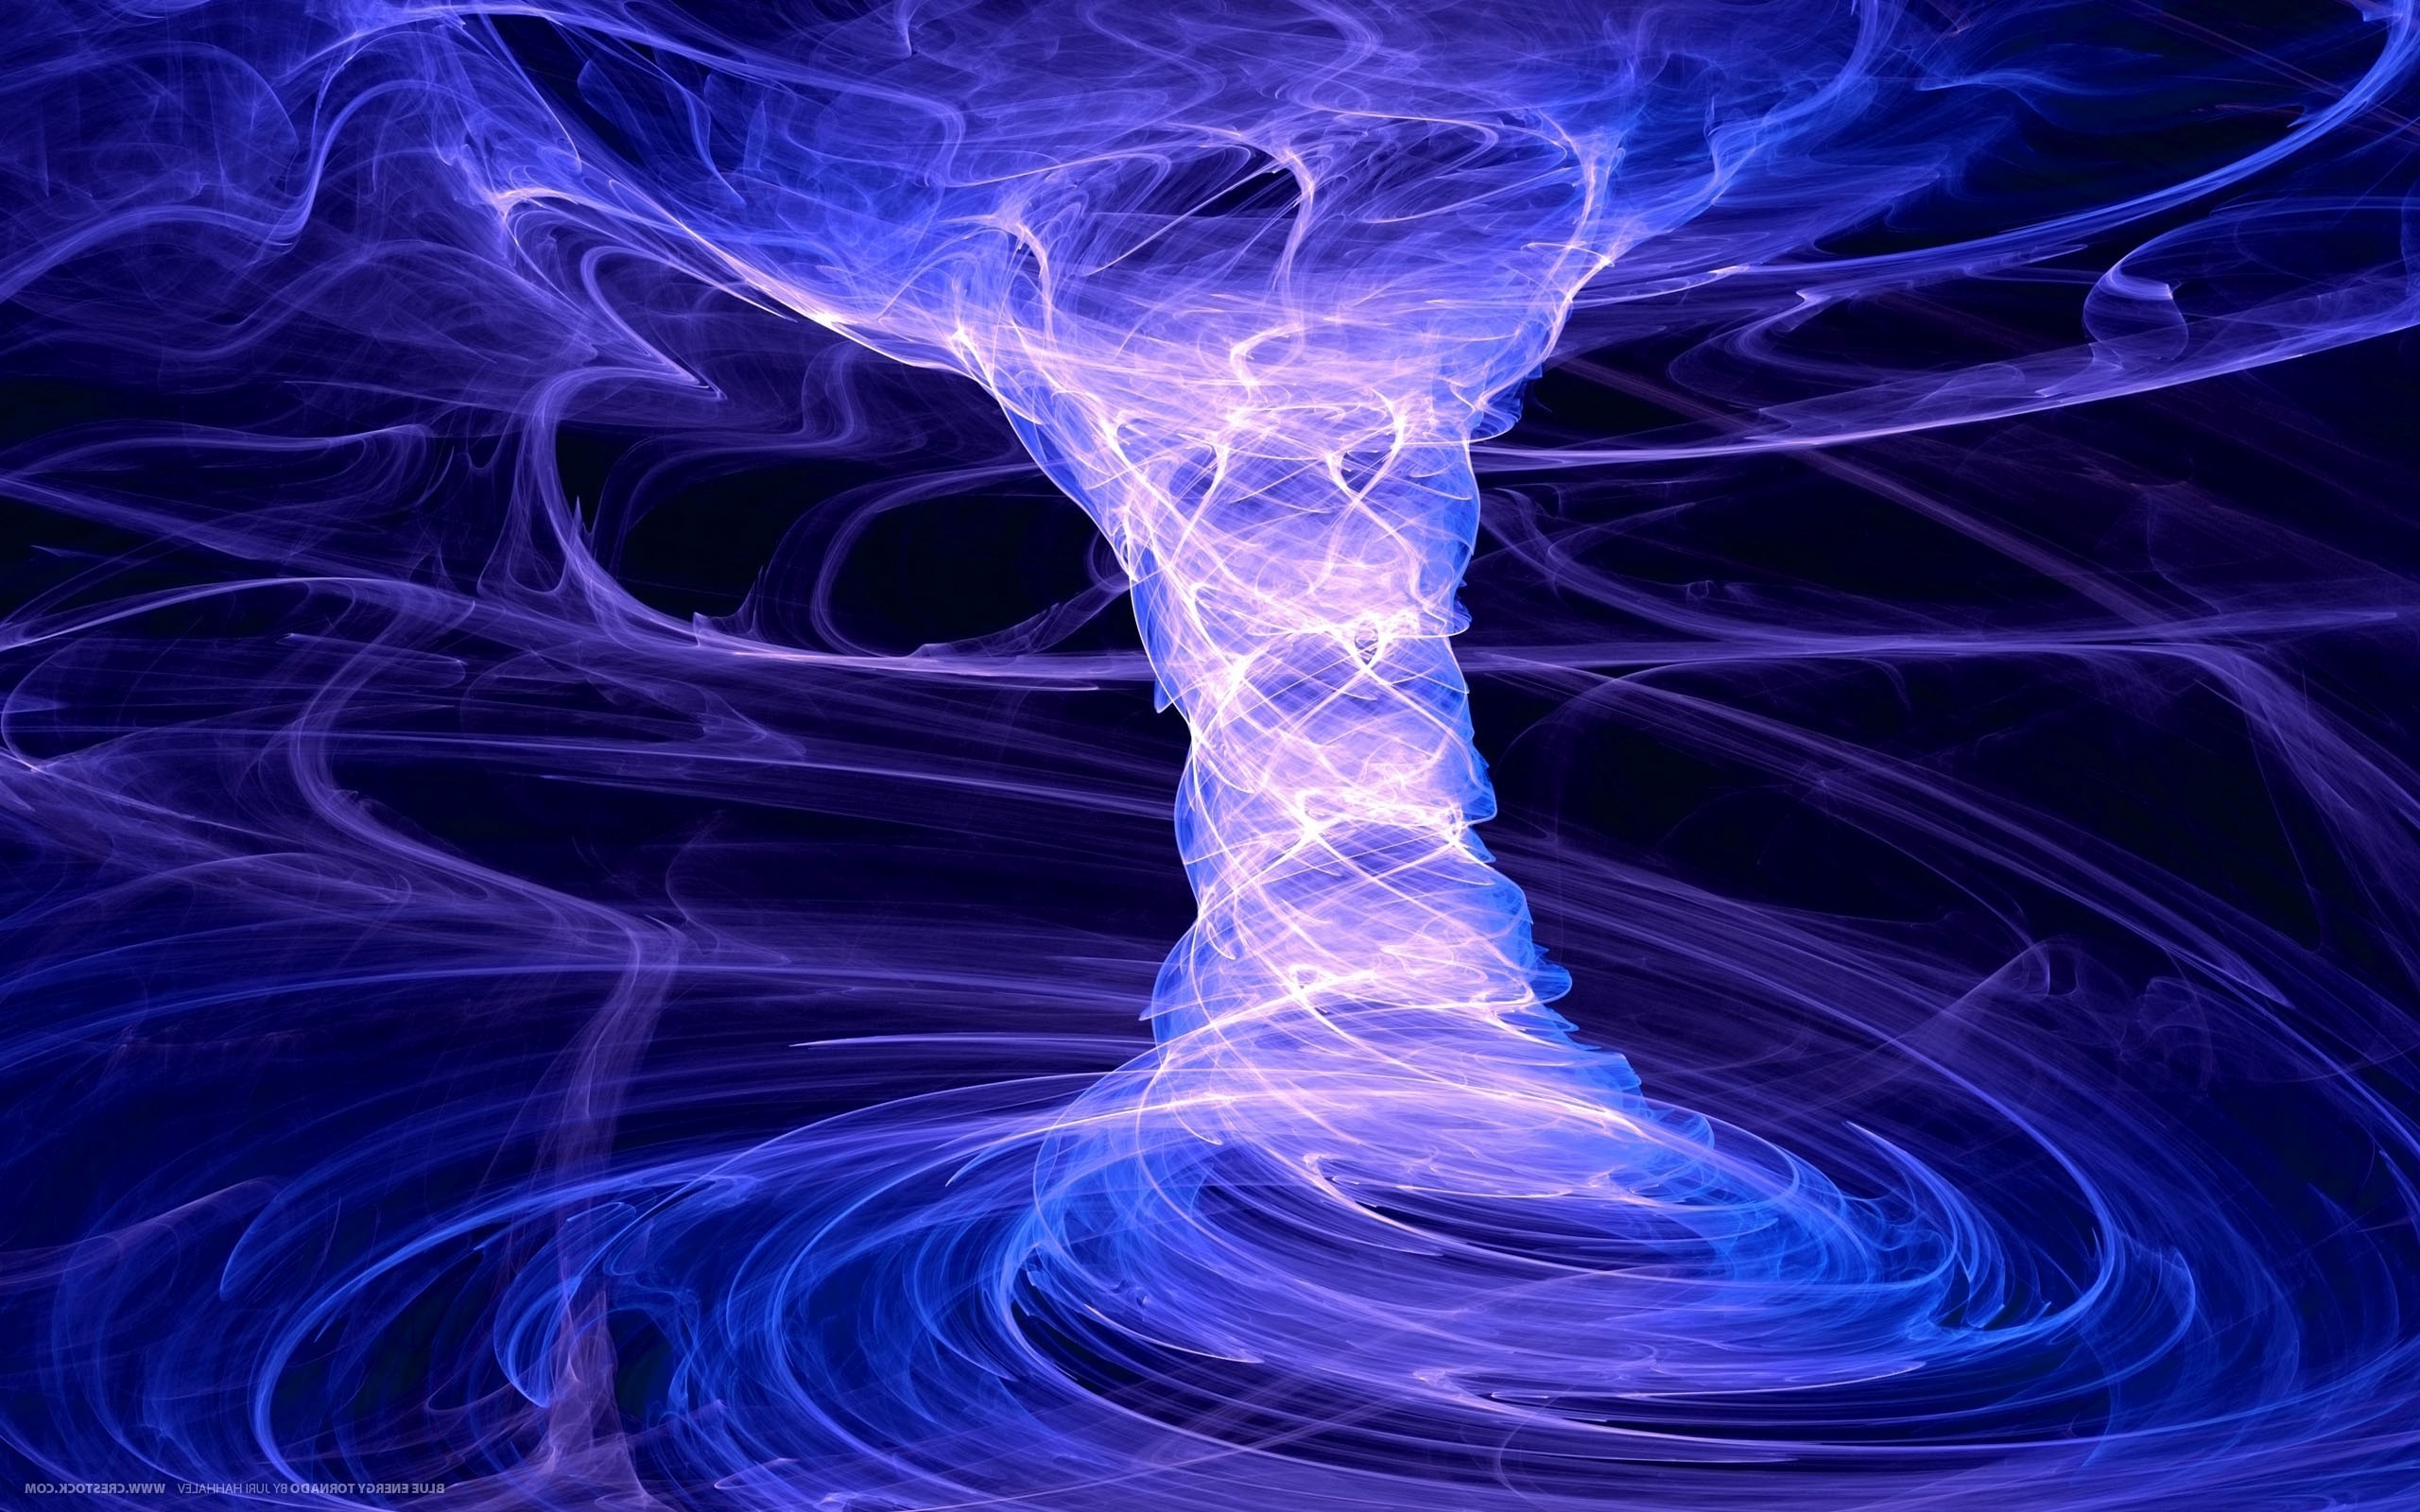 2560x1600 1920x1200 Image: Blue Flame Star Fractal wallpapers and stock photos. ÃÂ«